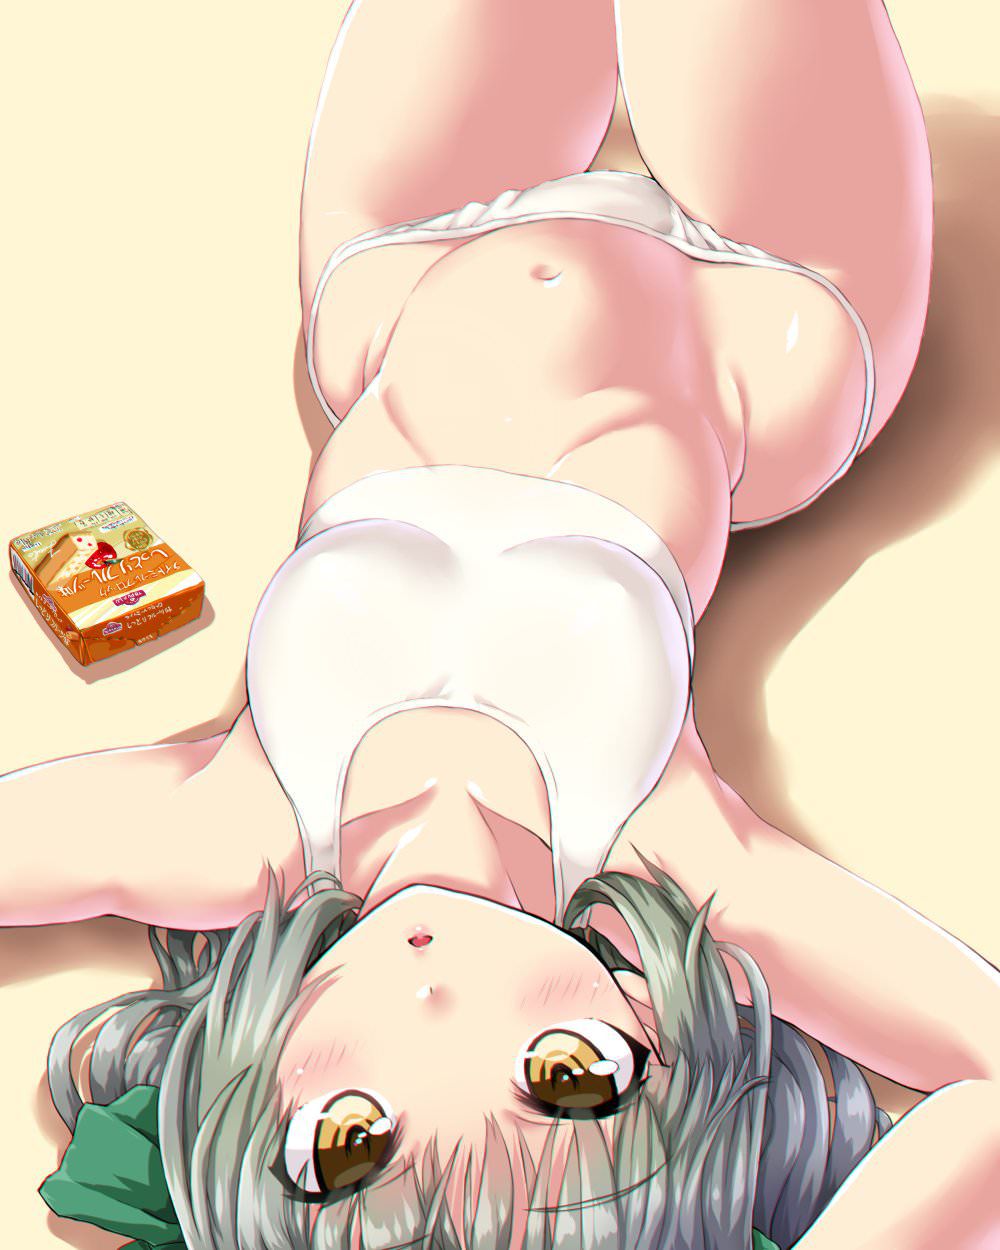 [Loli navel] charm of the navel of the soft-looking belly of Lori Girl! I tried to collect naughty images of the belly and the navel of Lori girl to enjoy the groin and the navel! 15